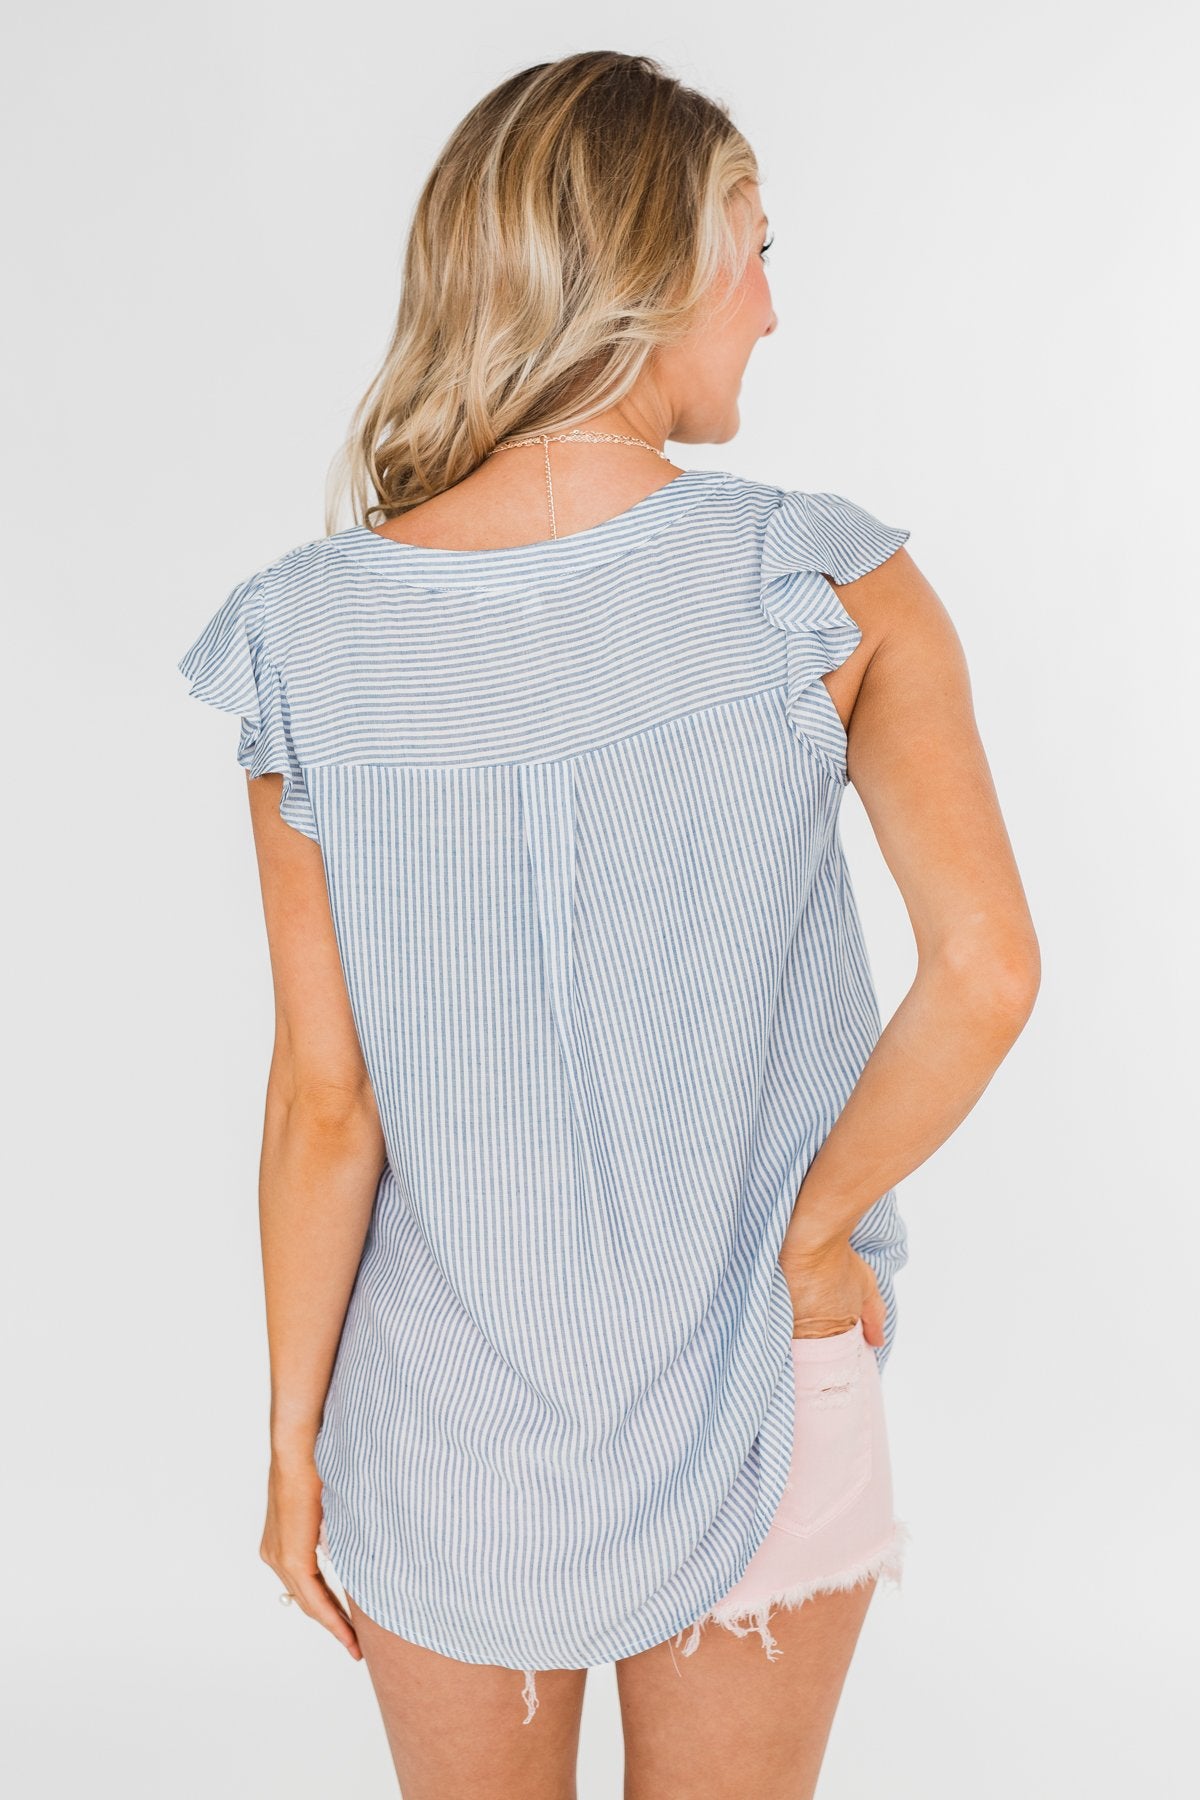 Ruffled Over You Striped Tank Top- Light Blue & Ivory